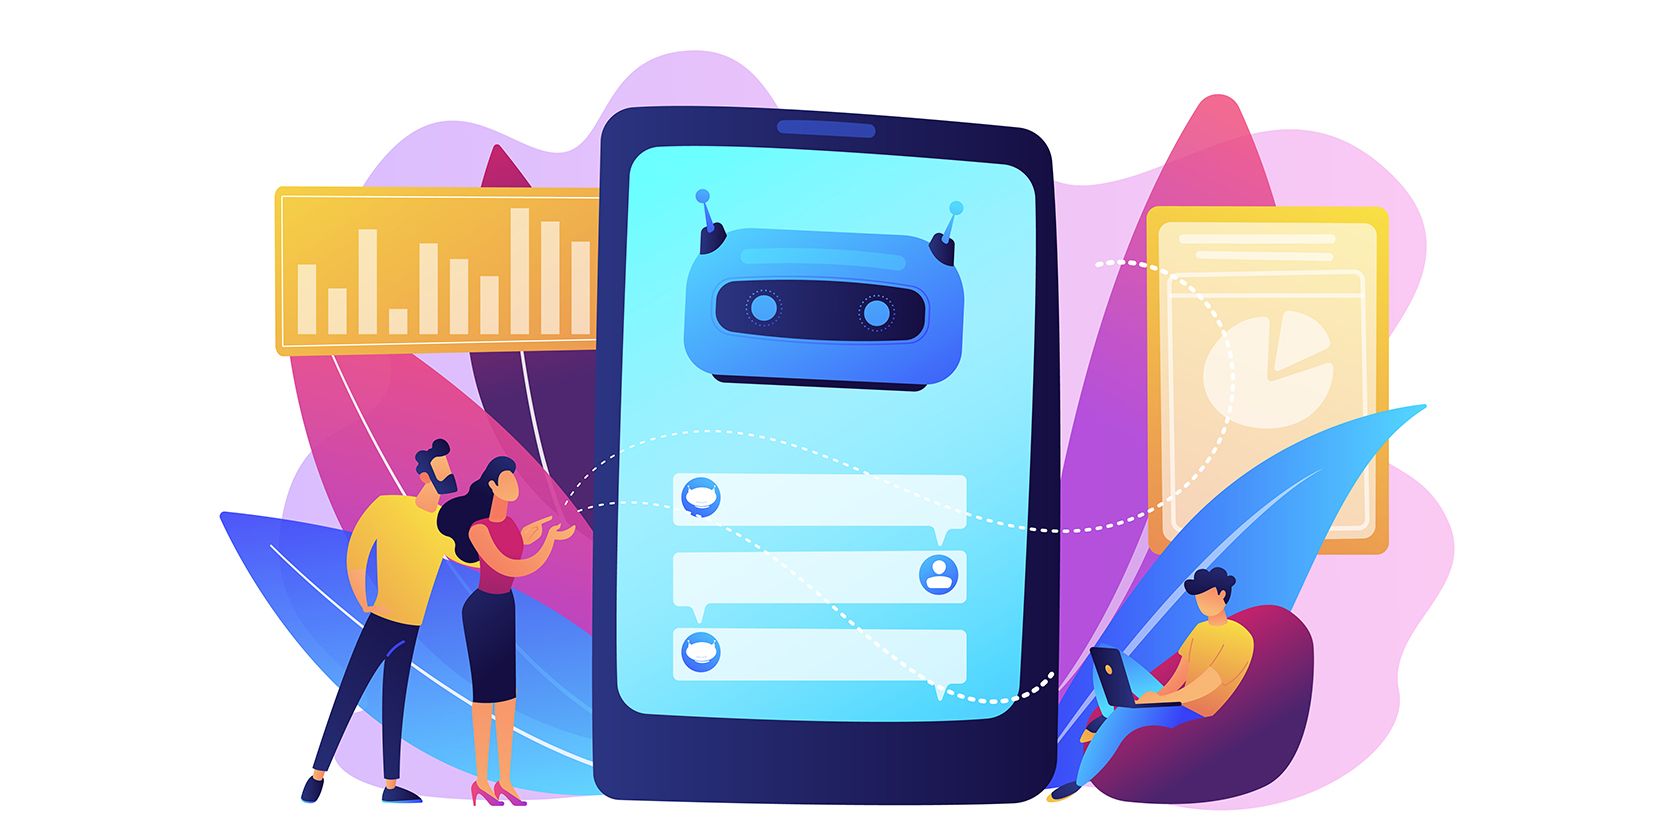 Concept illustration of AI personal assistants